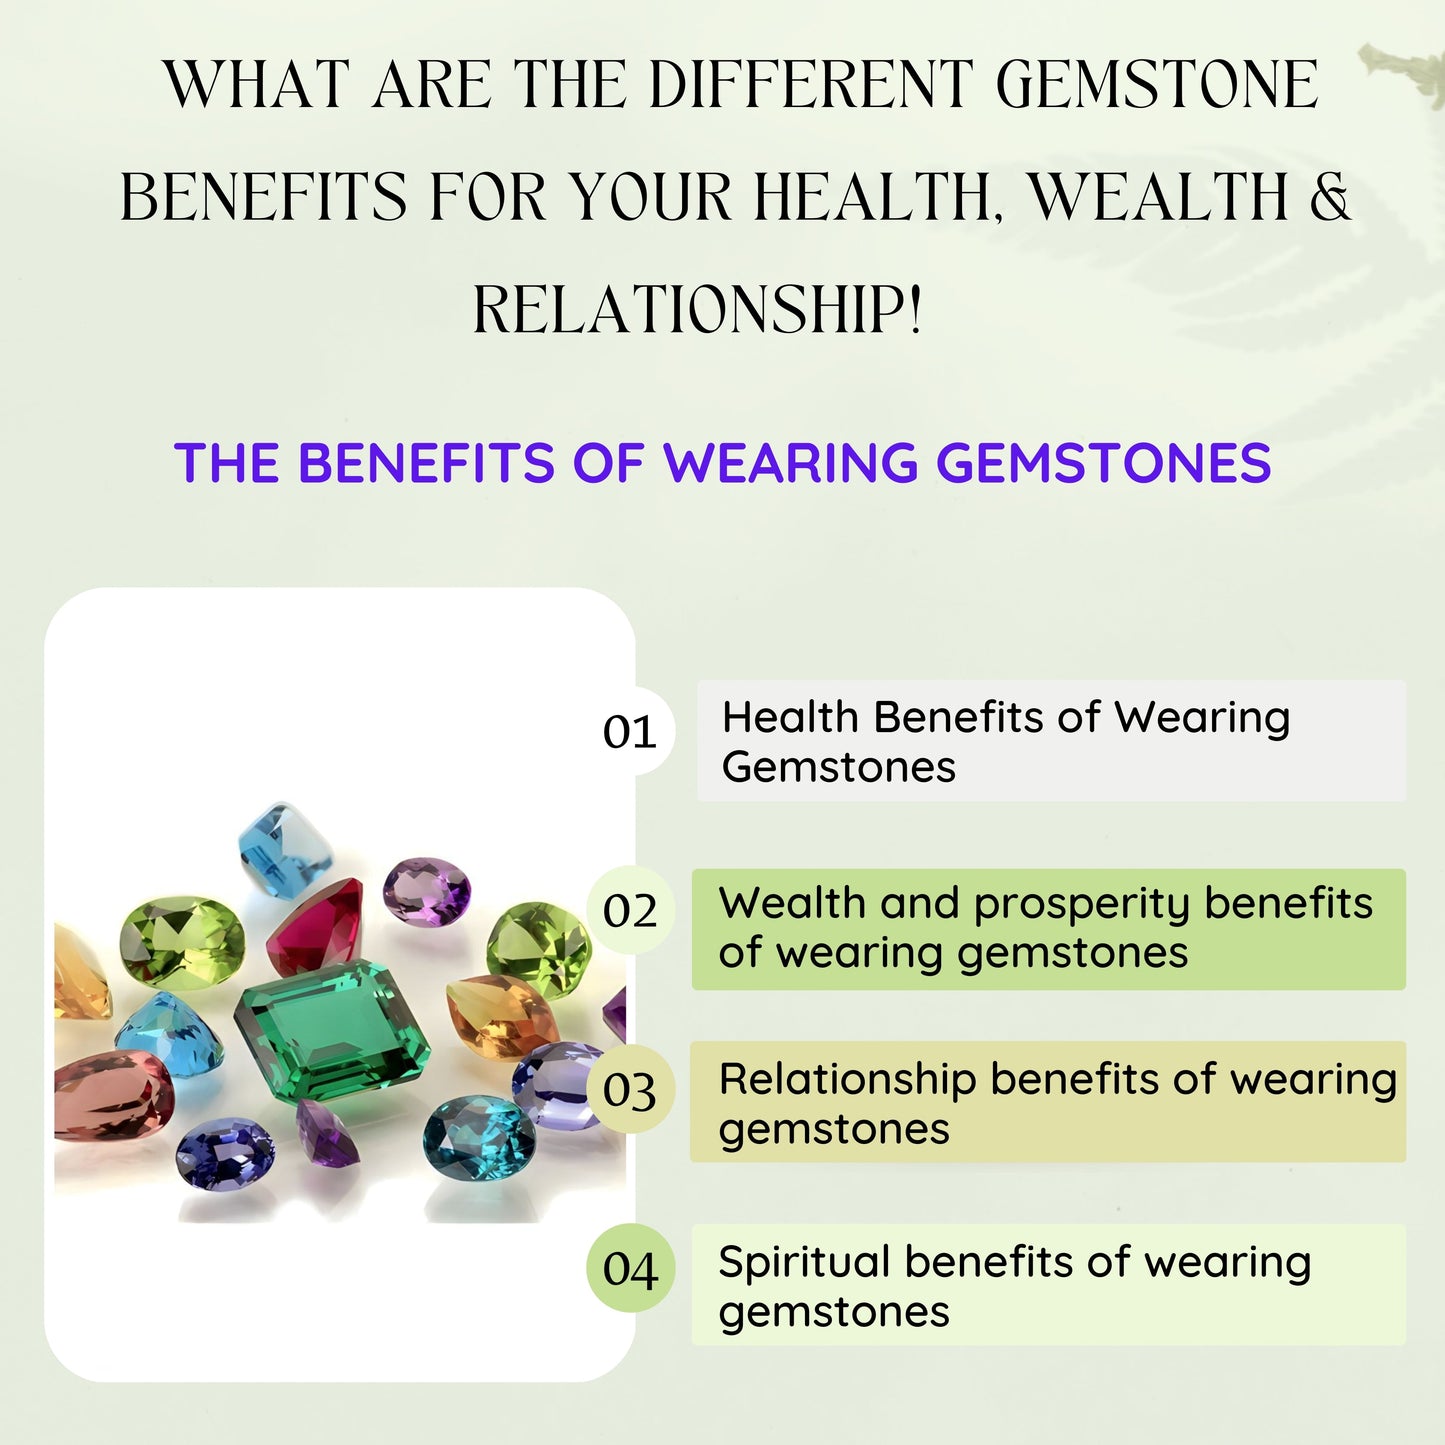 What are the different Gemstone Benefits for your Health, Wealth & Relationship!